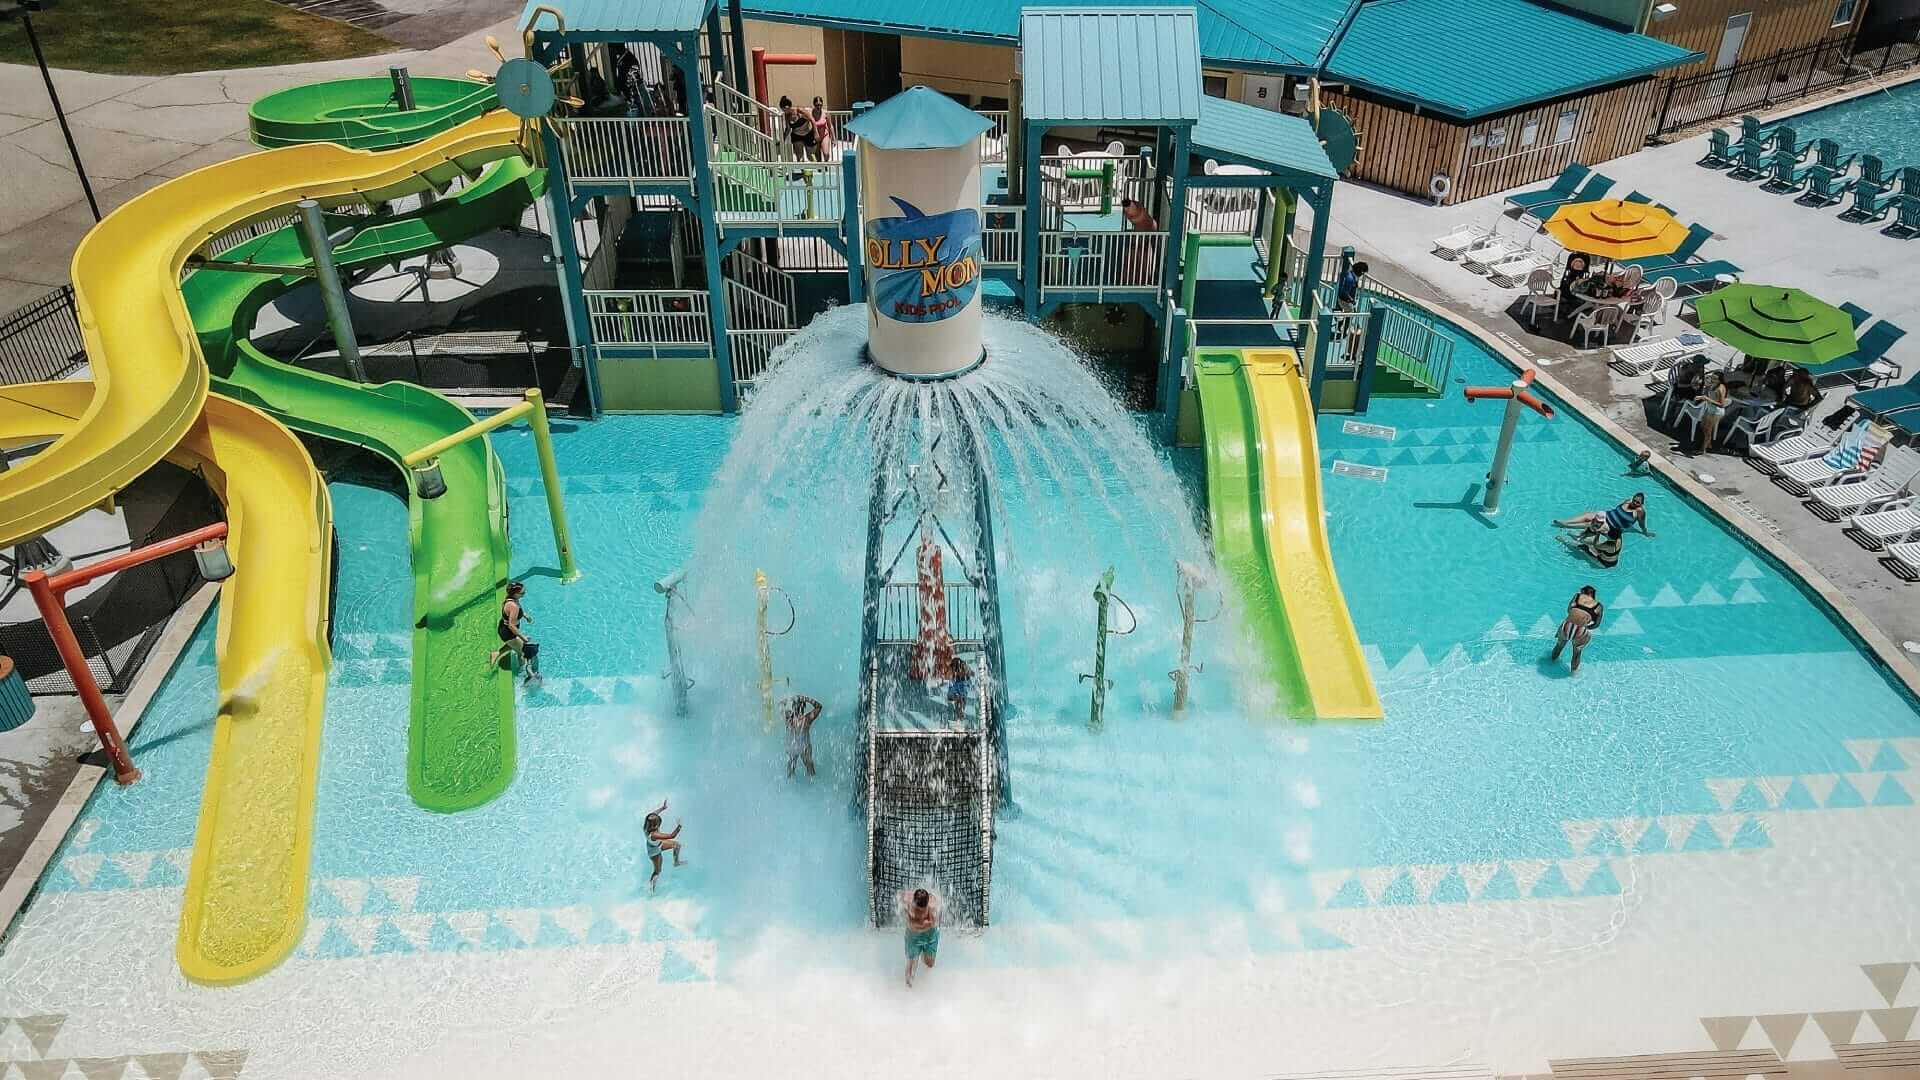 An arial view of the waterpark at Camp Margaritaville RV resort in Henderson Louisiana, which shows the large power plunge feature releasing a large volume of water ask kids rush to get drenched.